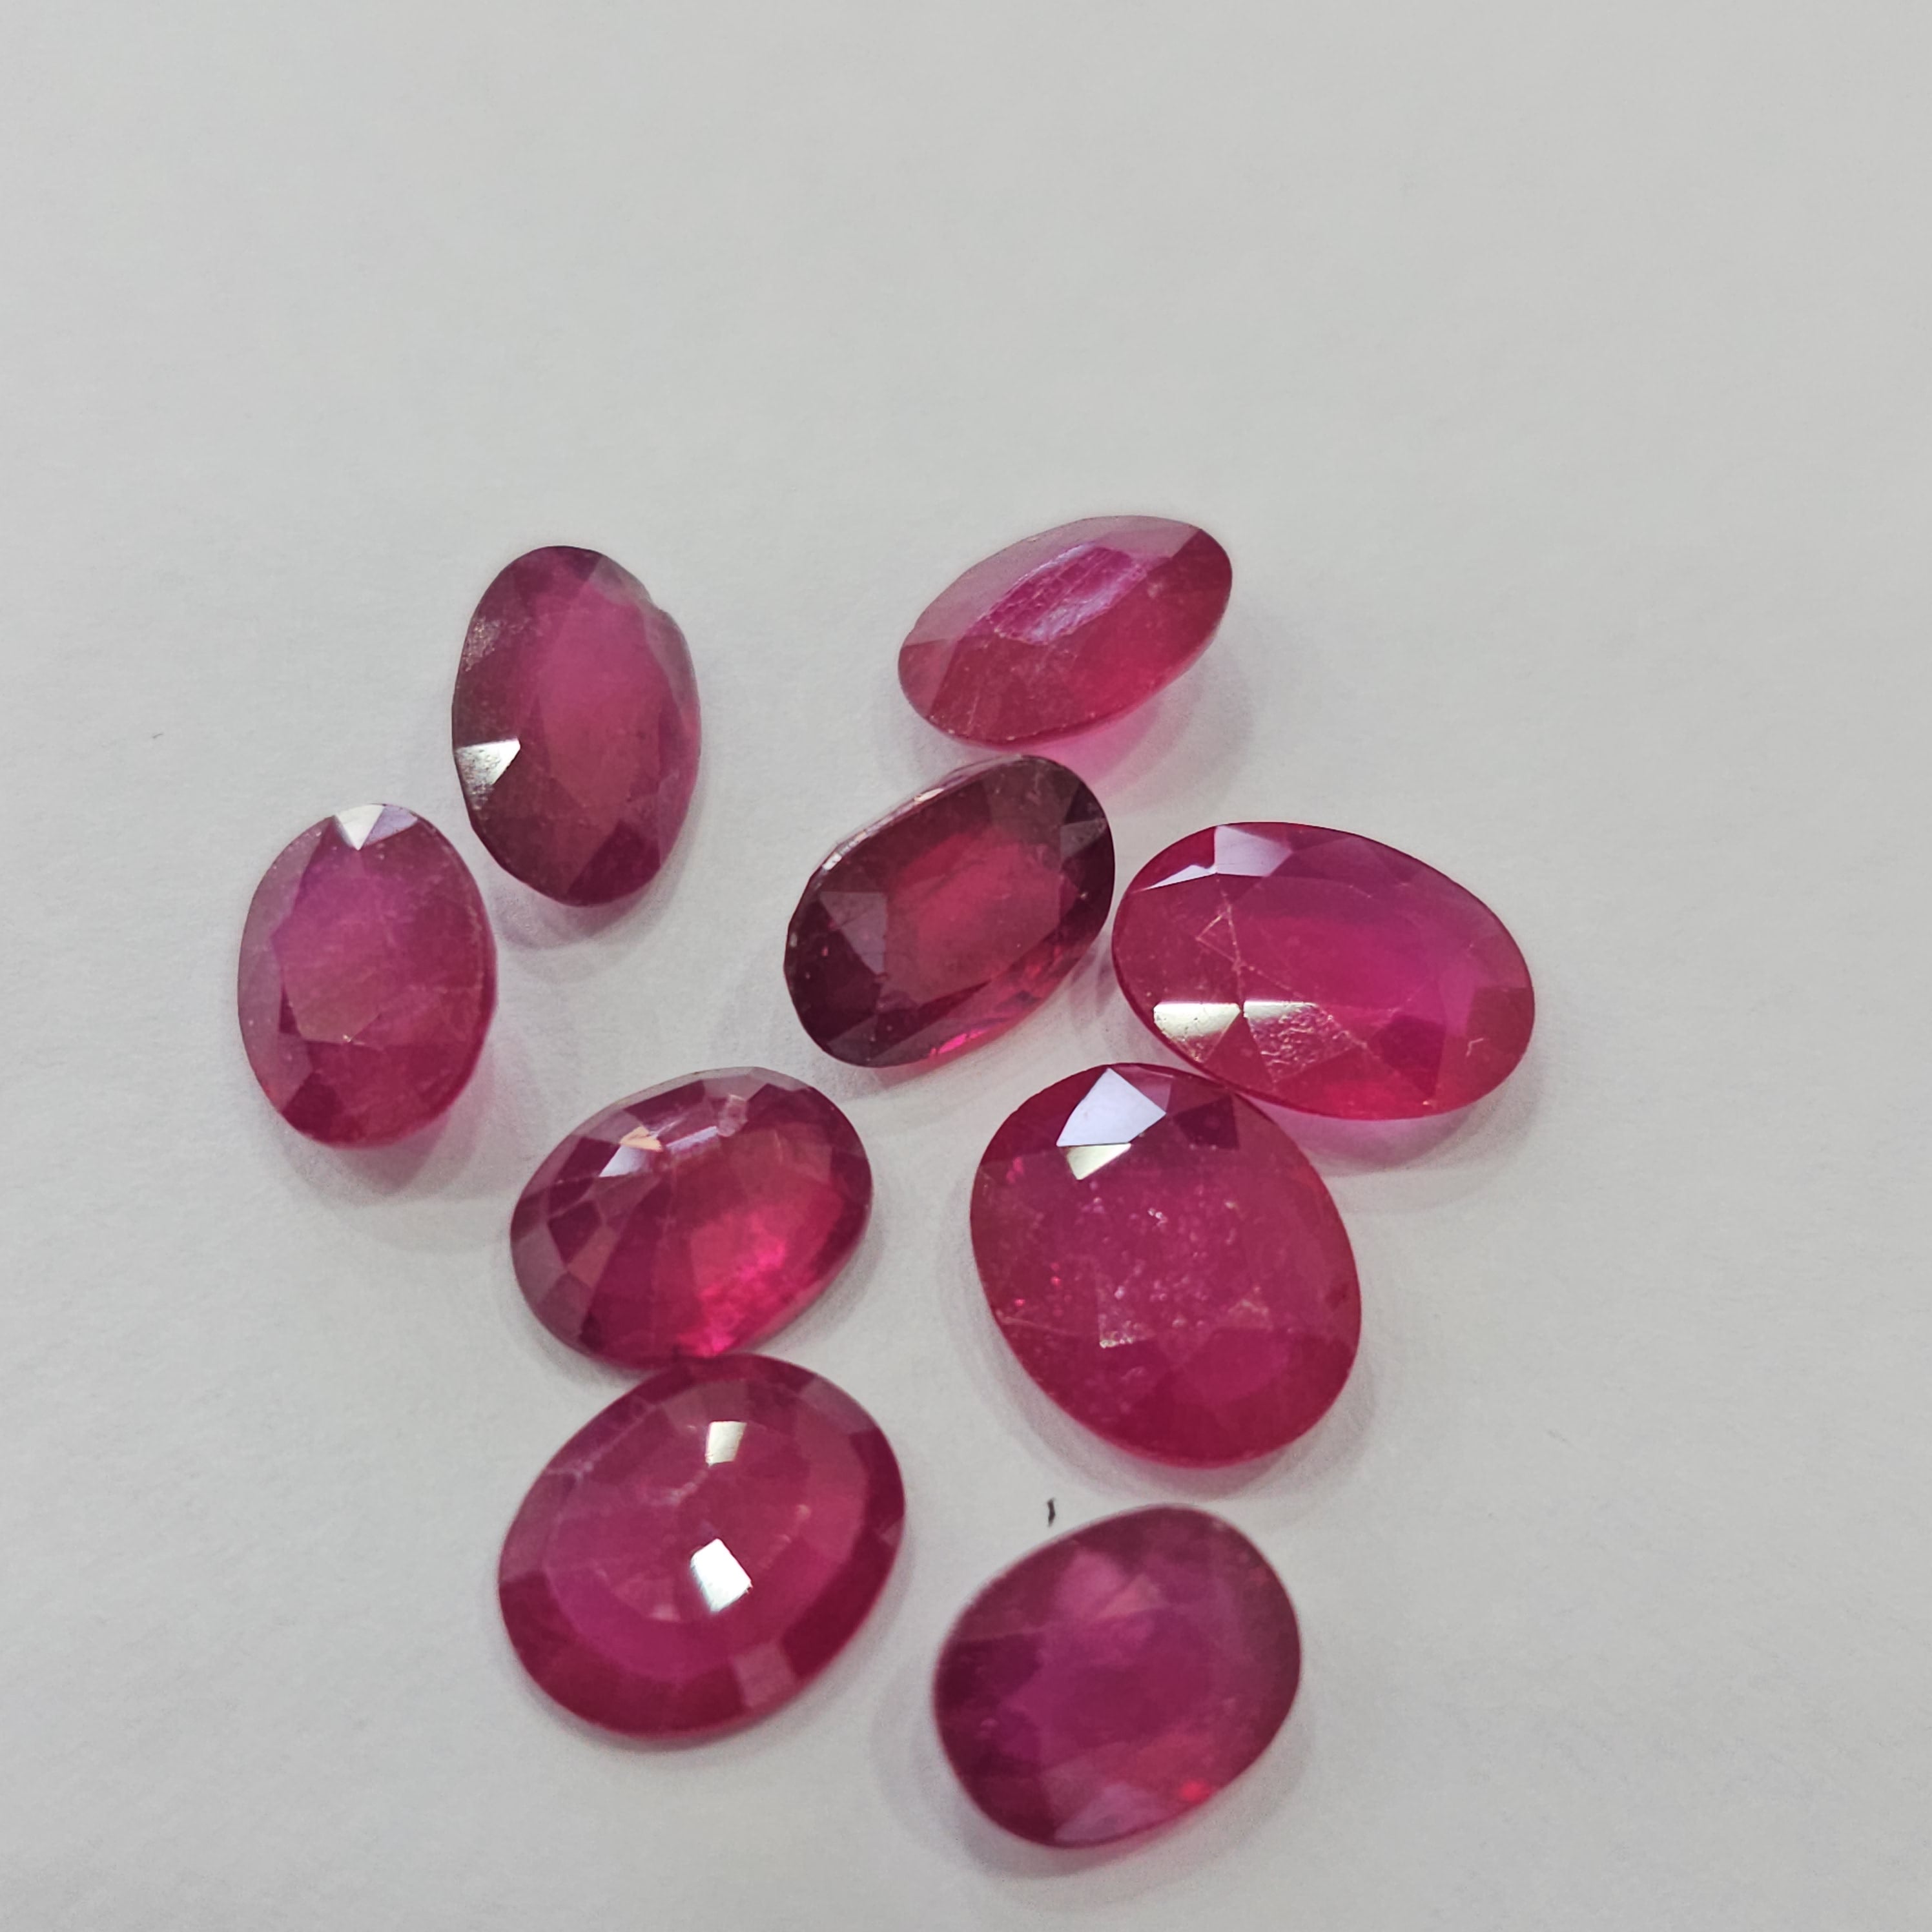 9 Pcs Natural Ruby Faceted Gemstone Shape: Oval | Size: 9-11mm - The LabradoriteKing